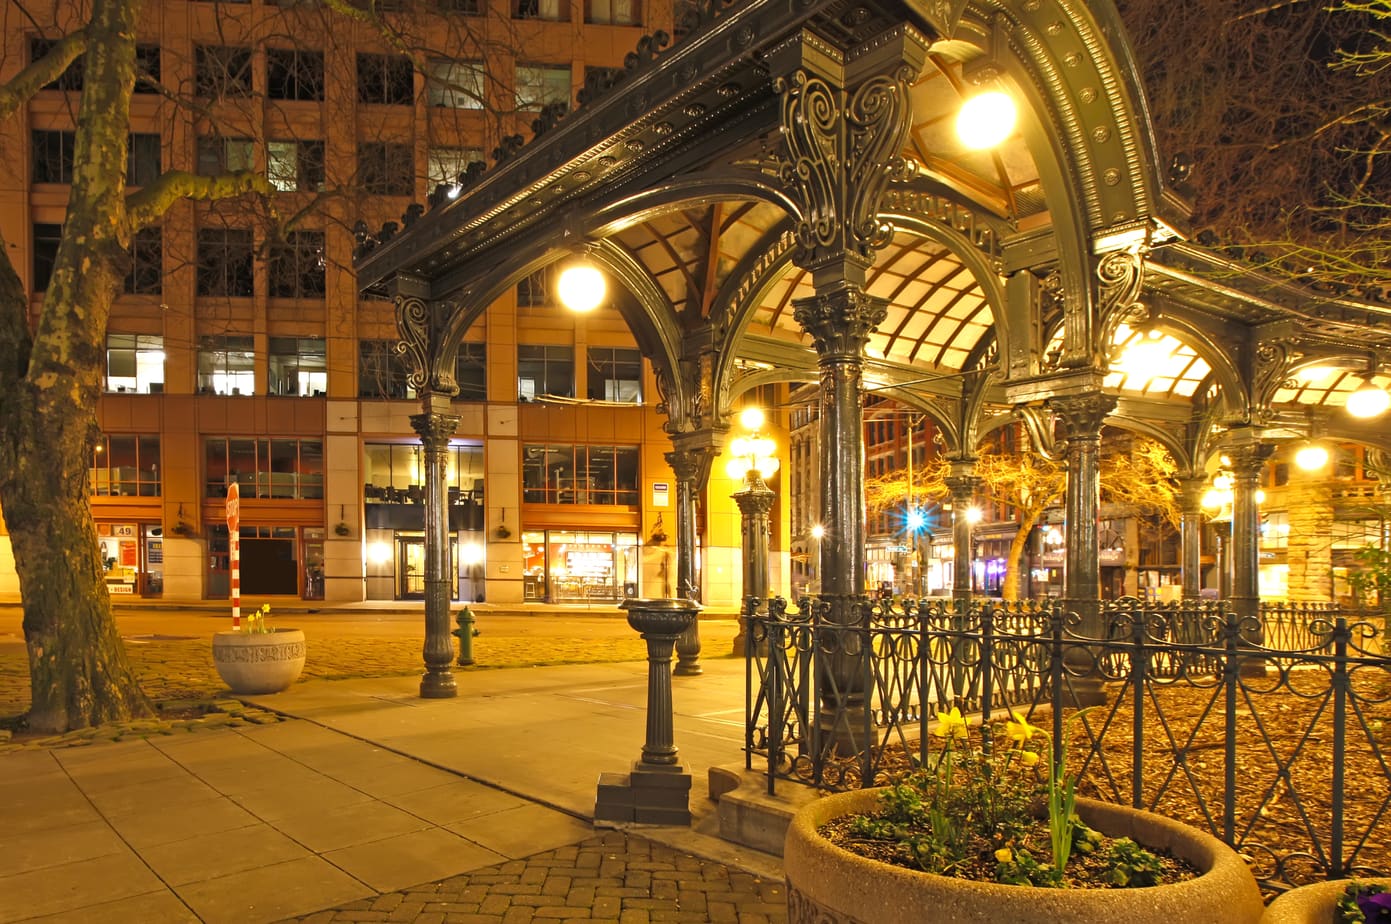 Seattle: 12 Things to Do in Pioneer Square